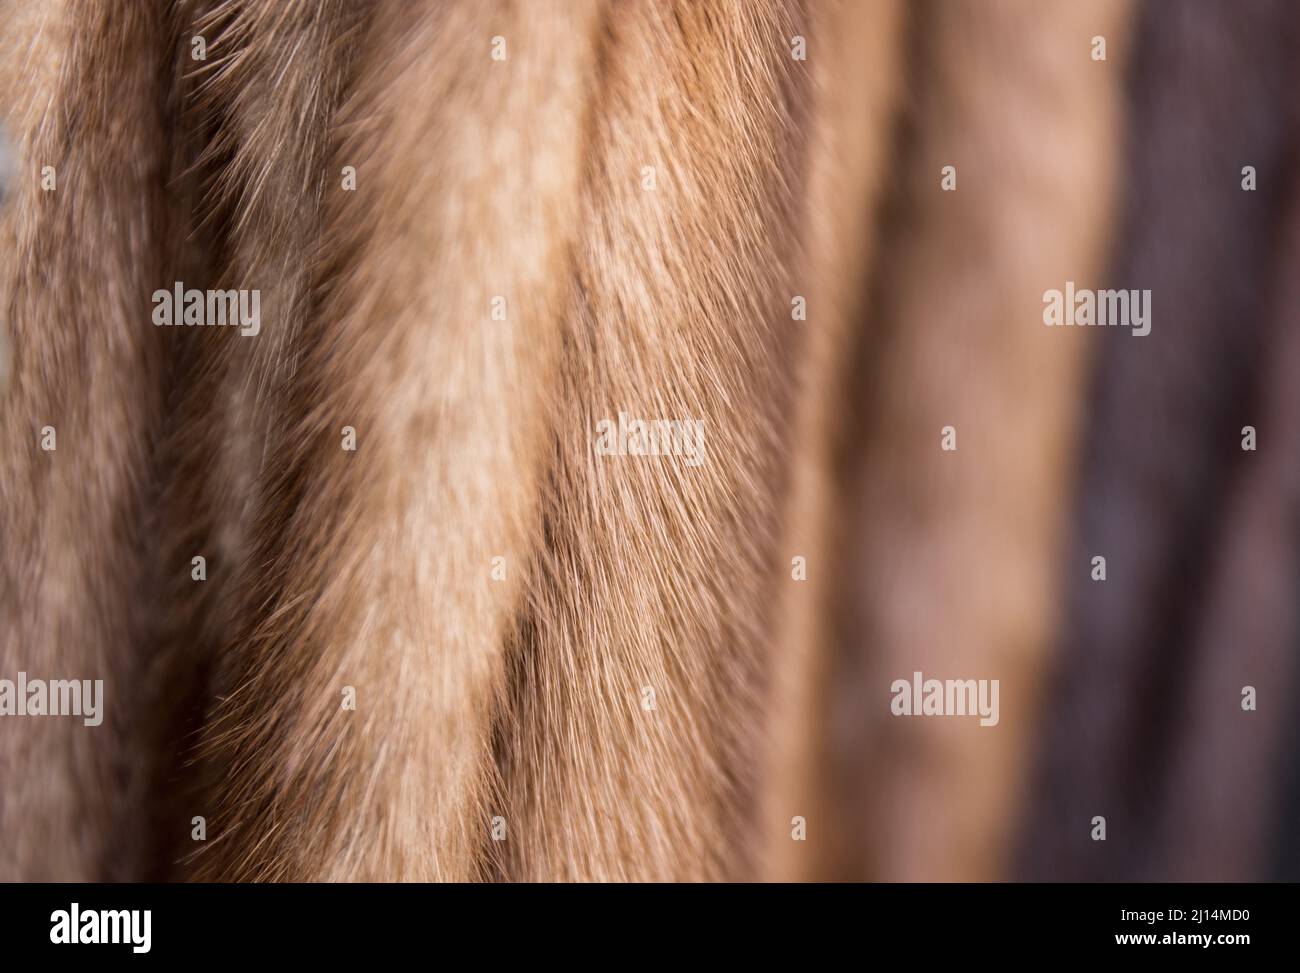 A background of vintage mink fur coats in shades of beige and brown. Shallow depth of field texture suitable for Animal Cruelty or luxury goods projec Stock Photo